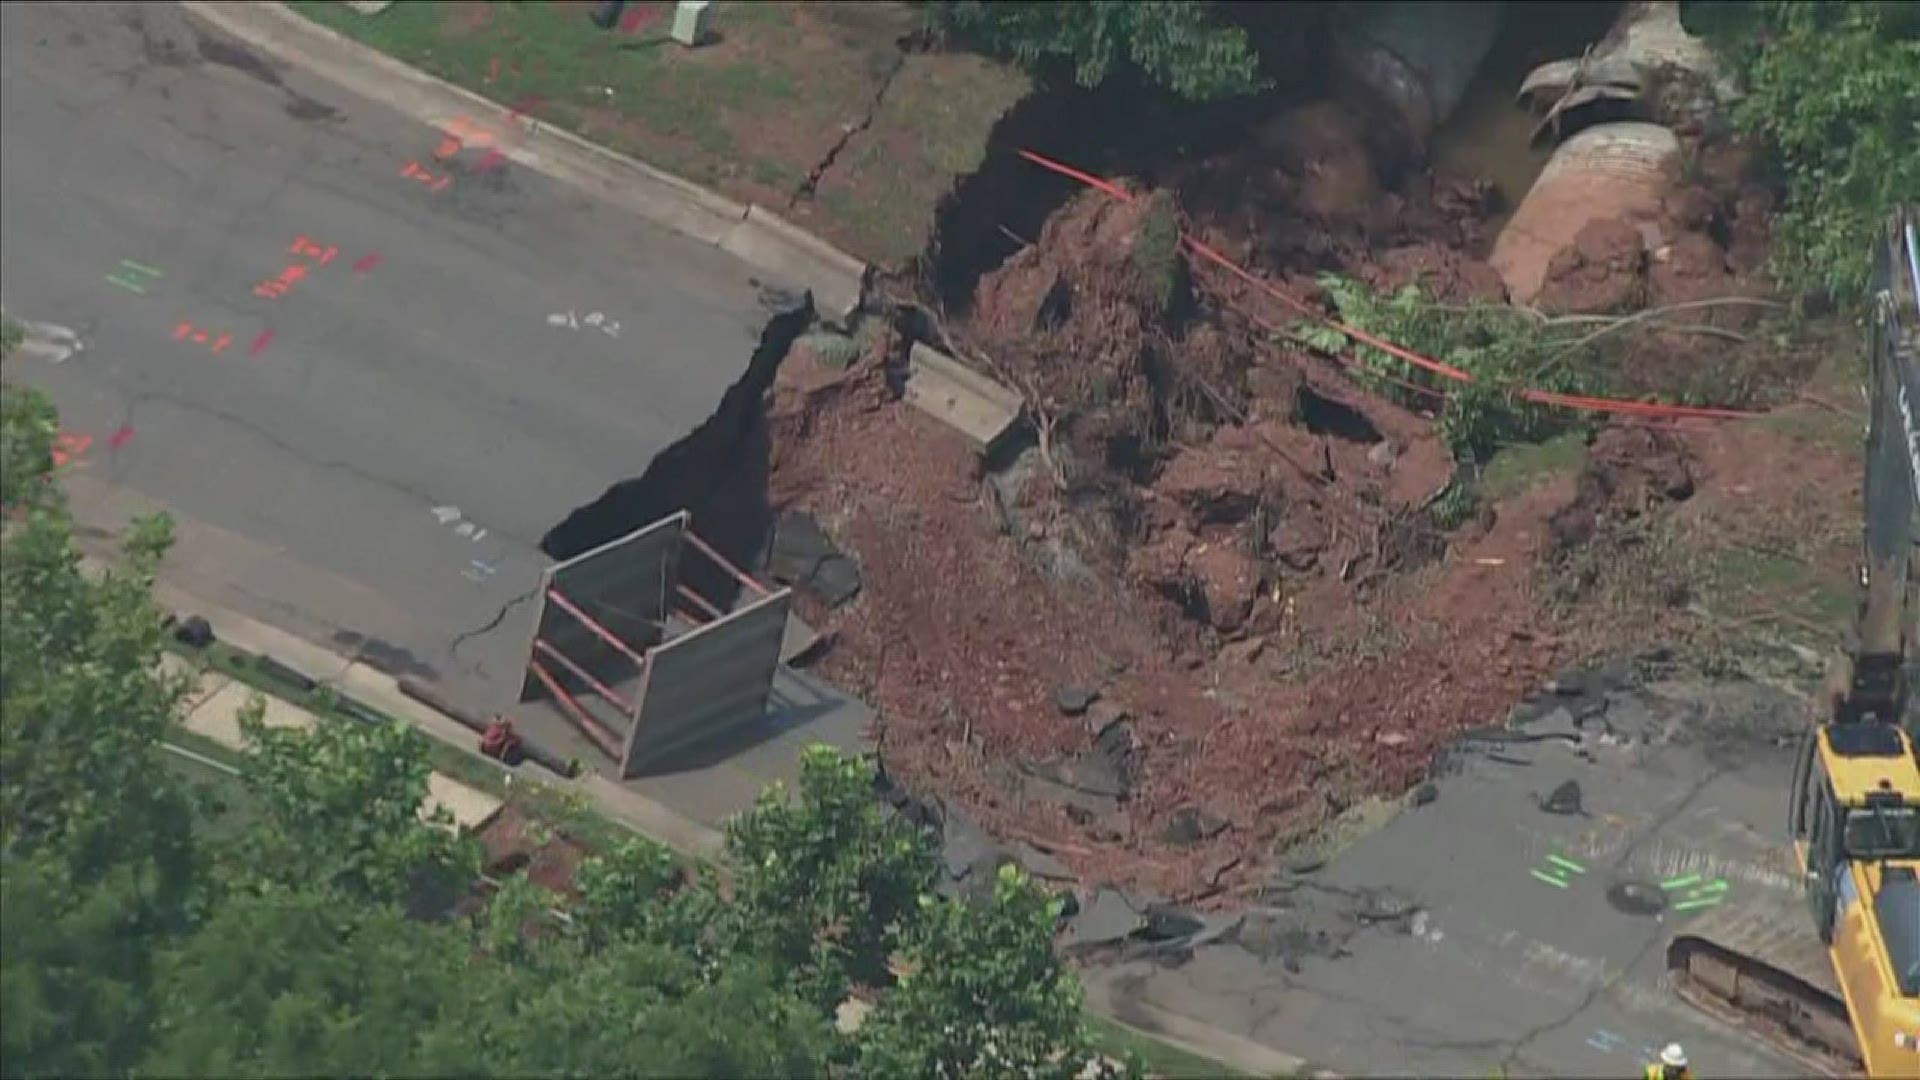 About 400 residents in the area of Moseby Drive in Manassas Park can't get out of their community Wednesday due to a road collapse caused by severe weather.